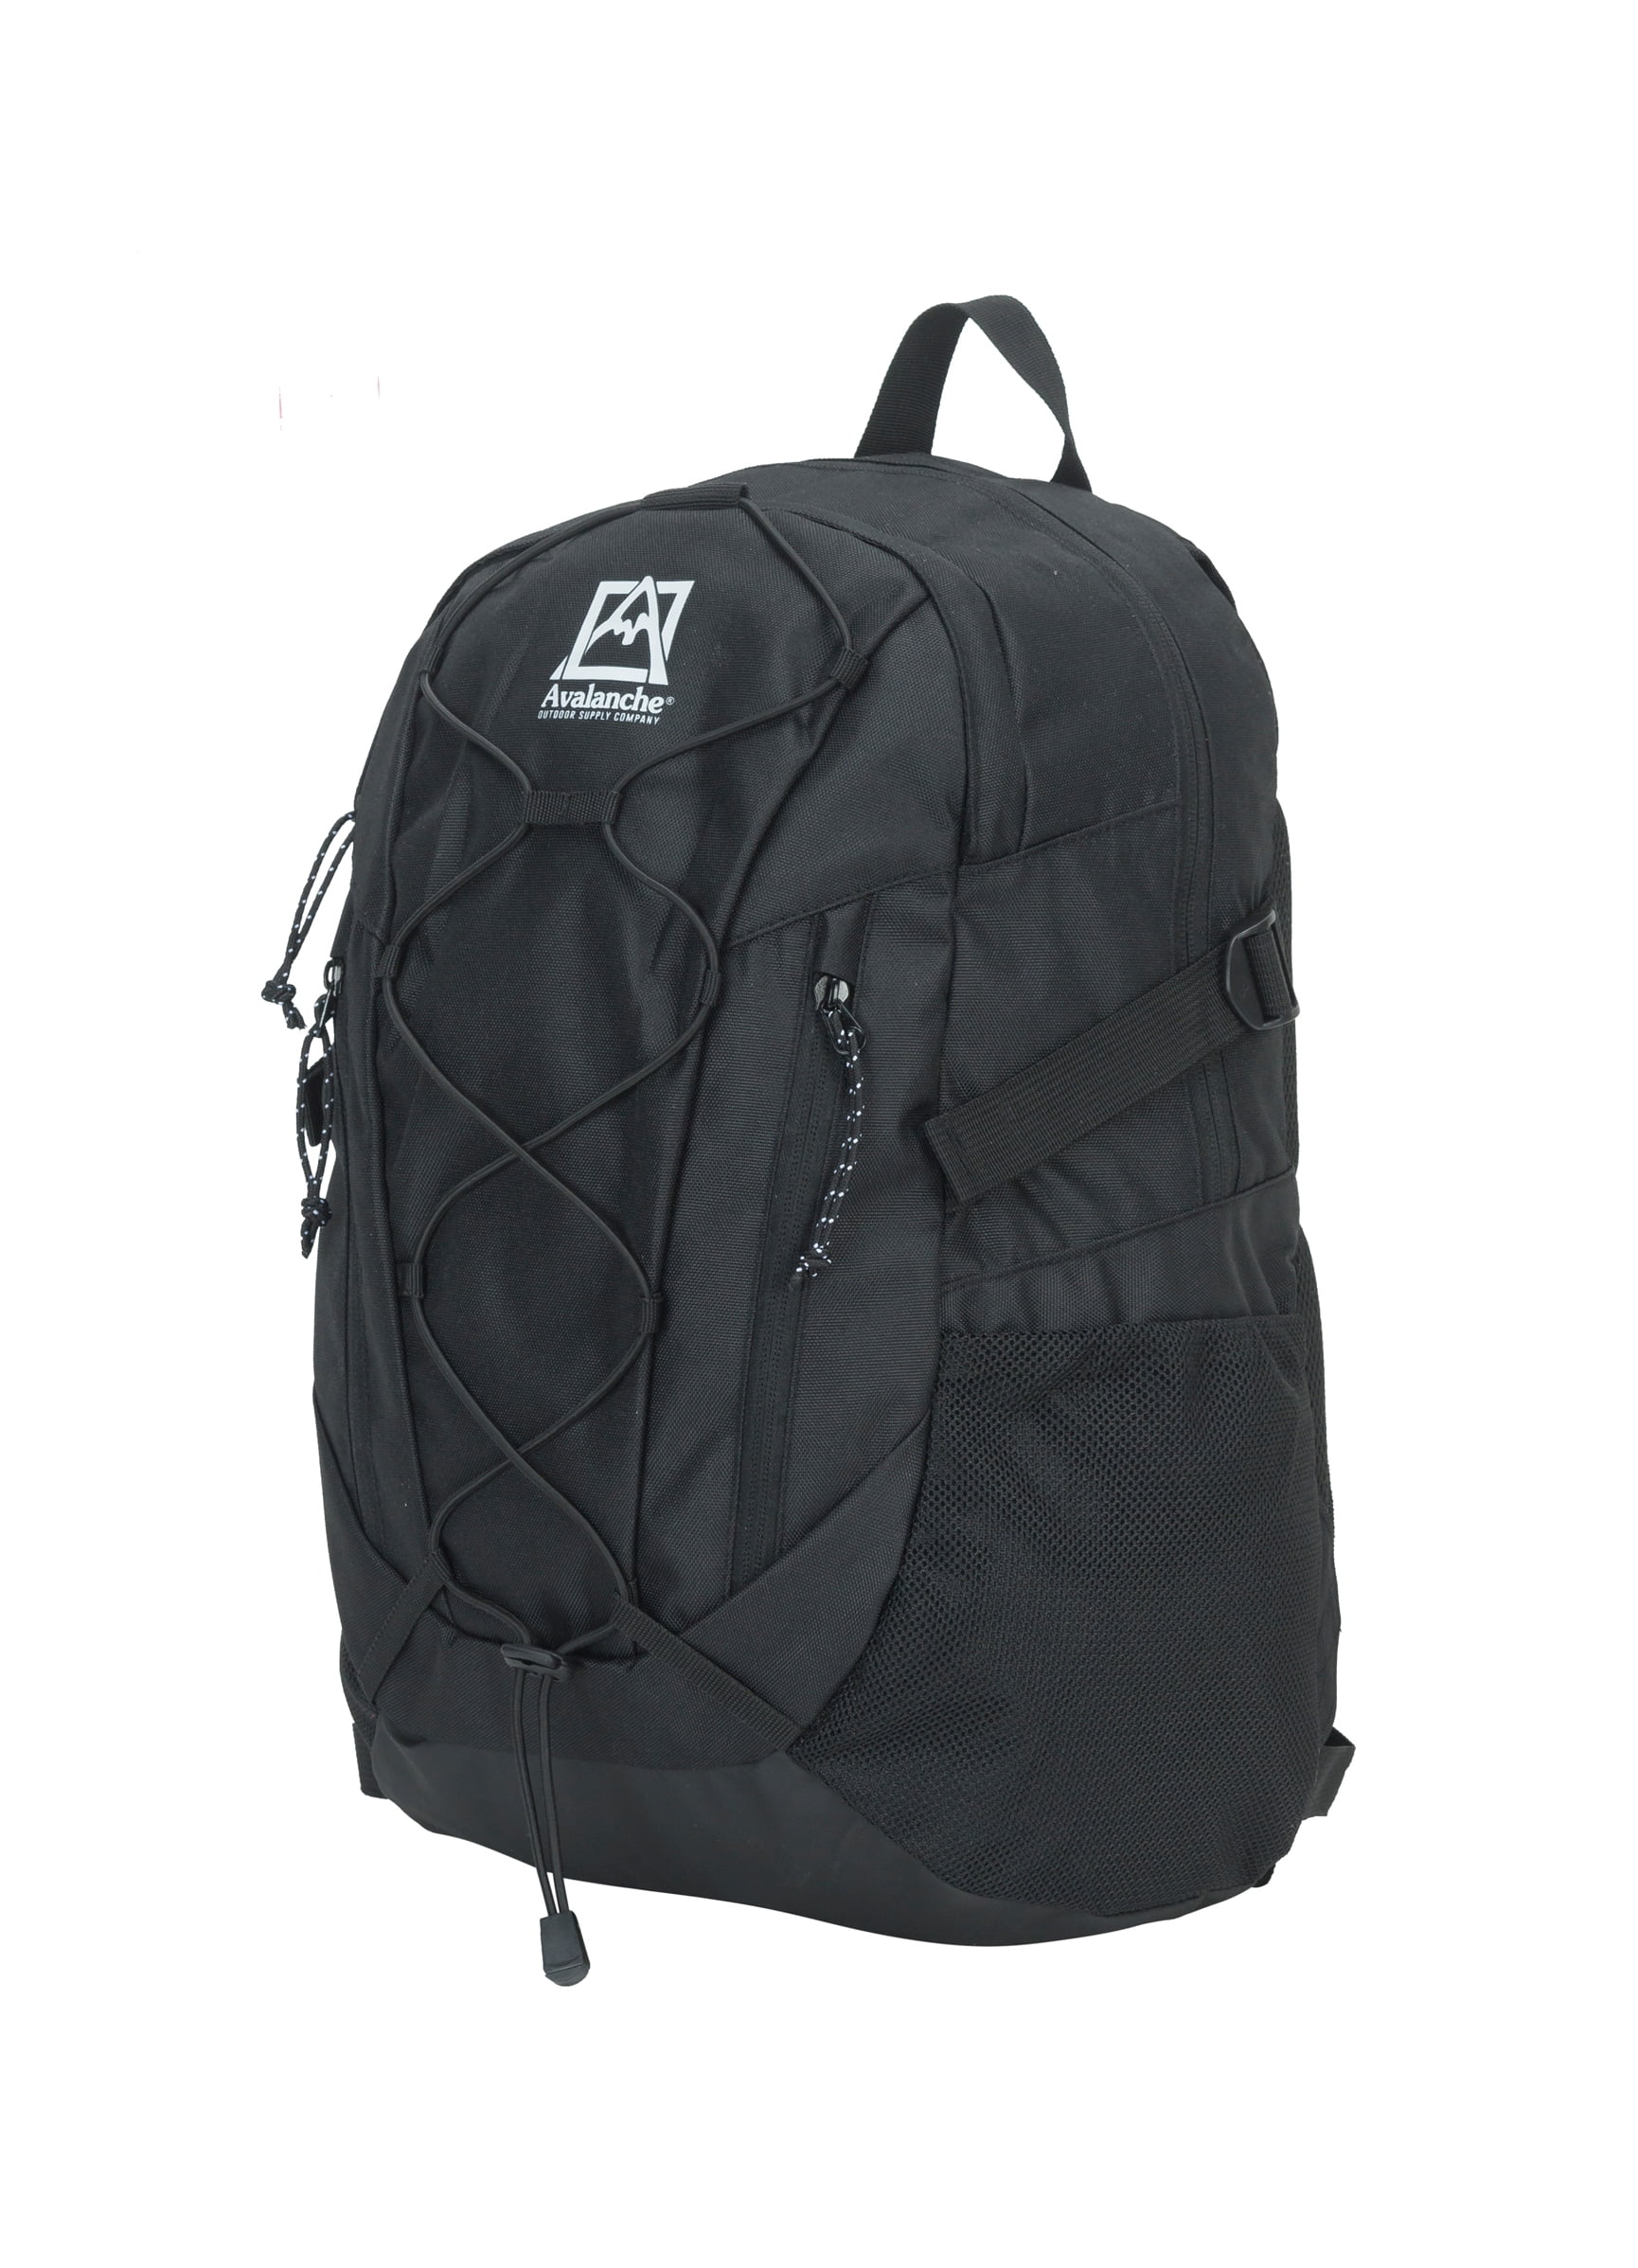 Avalanche Outdoors 26.6 Liter Sports Hiking Backpack With Water